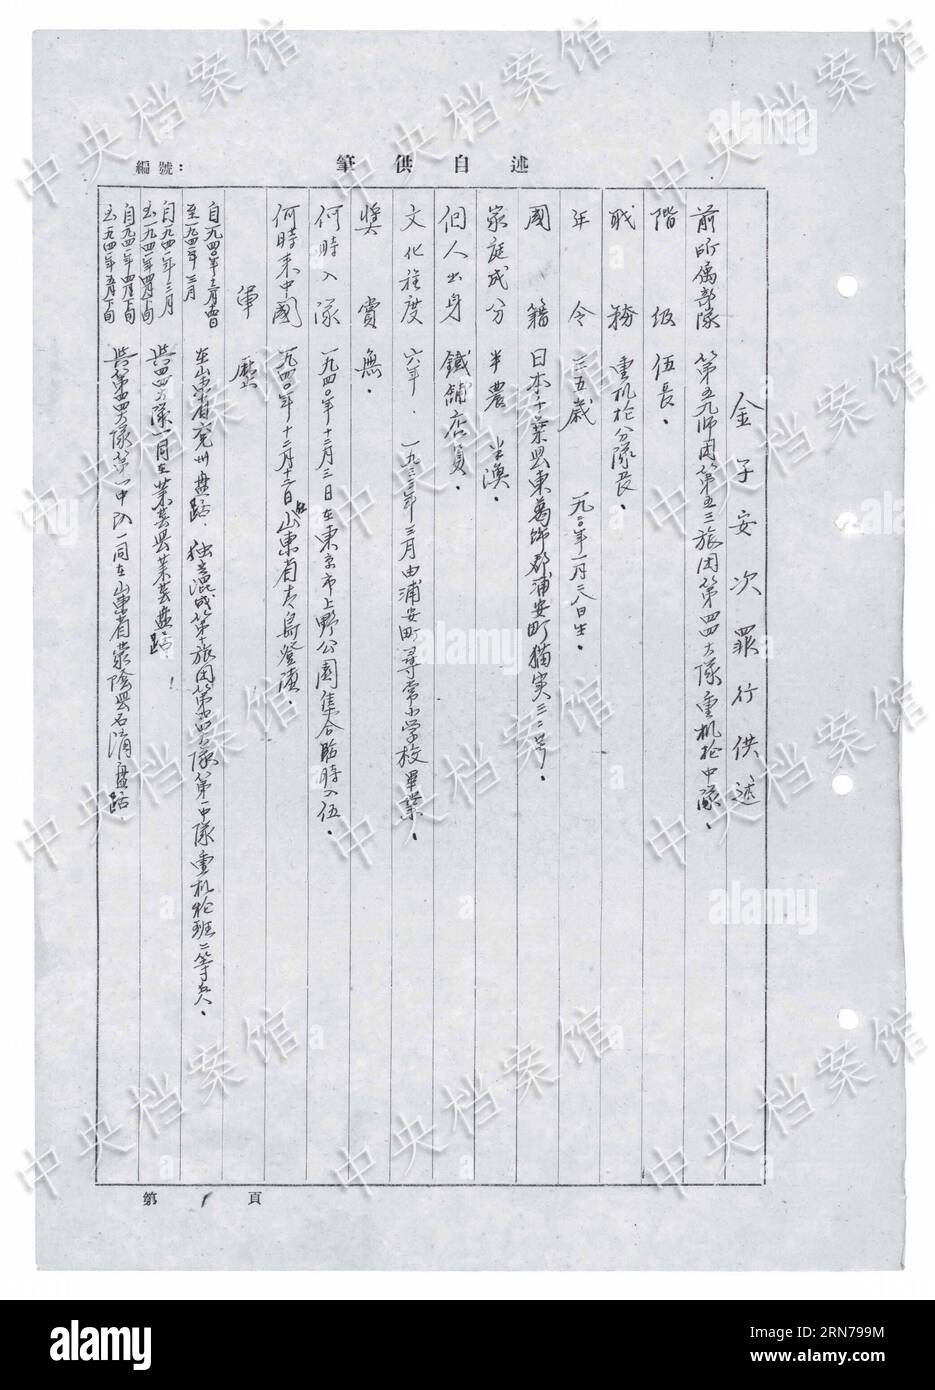 (150827) -- BEIJING, Aug. 27, 2015 () -- Photo released on Aug. 27, 2015 by the State Archives Administration of China on its website shows the Chinese version of an excerpt from Japanese war criminal Yasuji Kaneko s handwritten confession. The seventeenth in a series of 31 handwritten confessions from Japanese war criminals published online, the confession features Yasuji Kaneko, who was born in 1920. He joined the Japanese War of Aggression against China in 1940, and was captured in August 1945. Kaneko and his companions arrested two Chinese peasants in Laiwu County of Shandong Province, tie Stock Photo